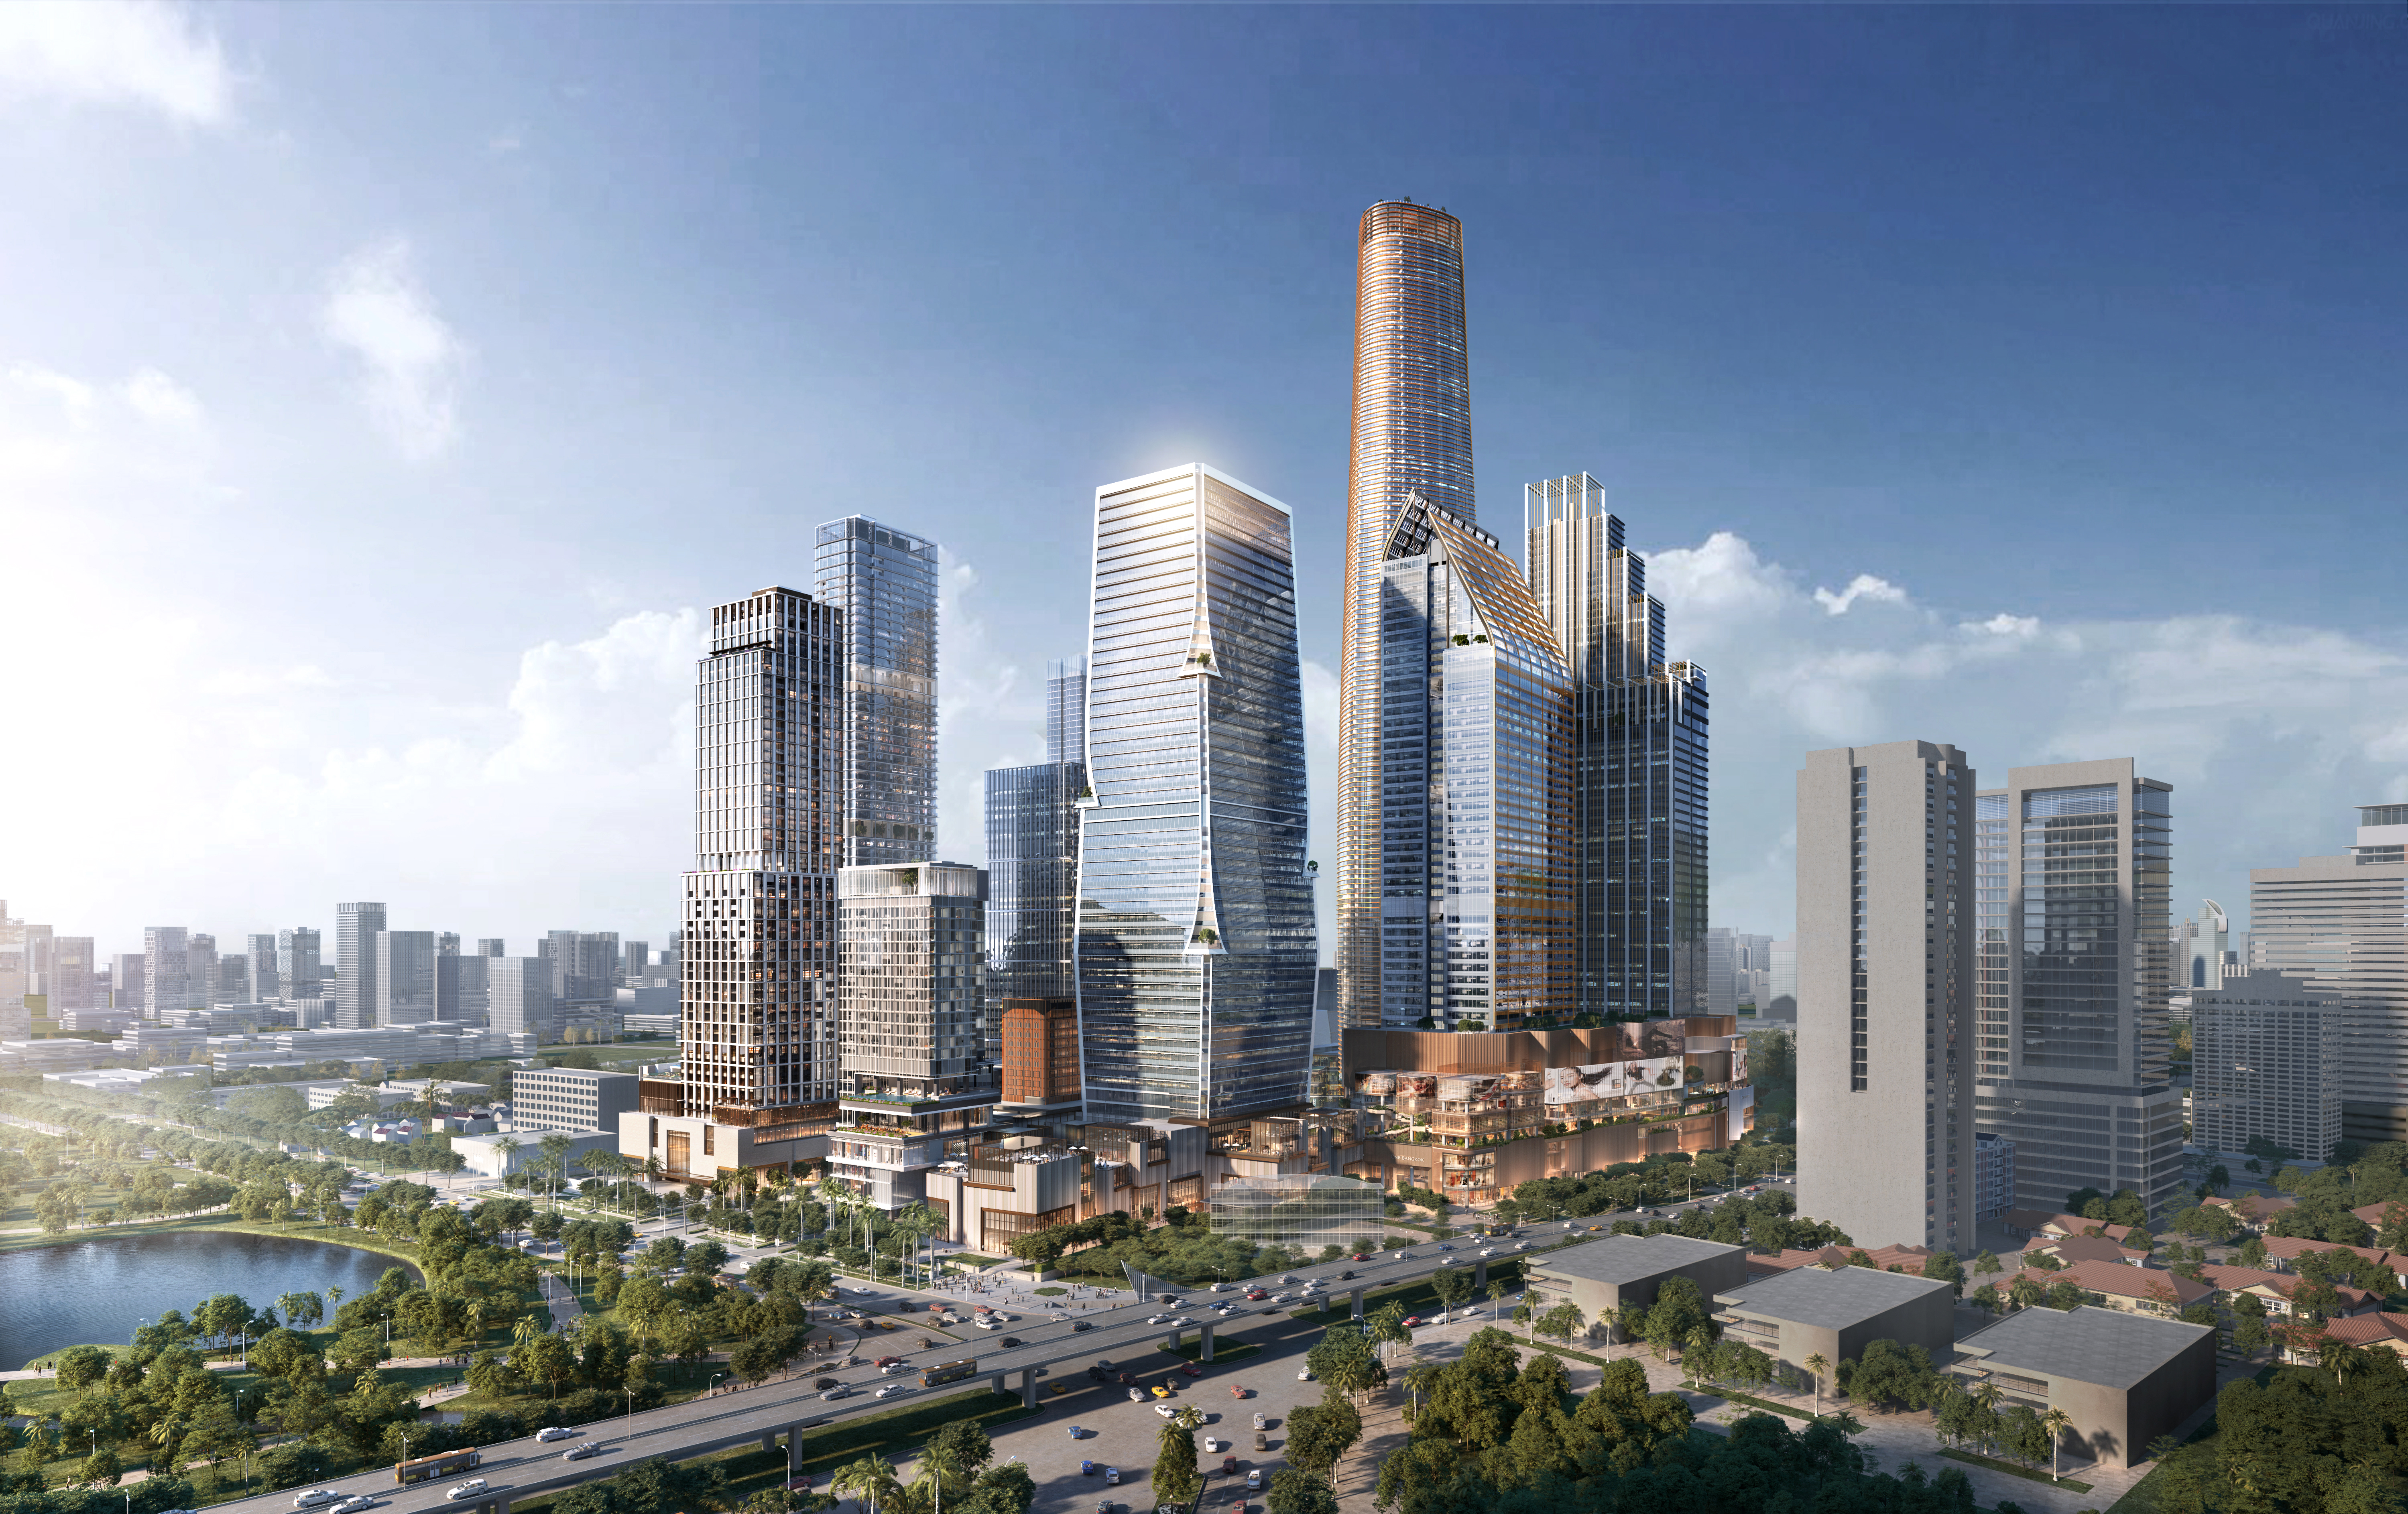 One Bangkok, our upcoming fully-integrated district in the heart of Bangkok is envisioned to reshape and redefine Bangkok’s urban landscape in a positive and lasting way, setting new standards in terms of design, quality, connectivity and sustainability.